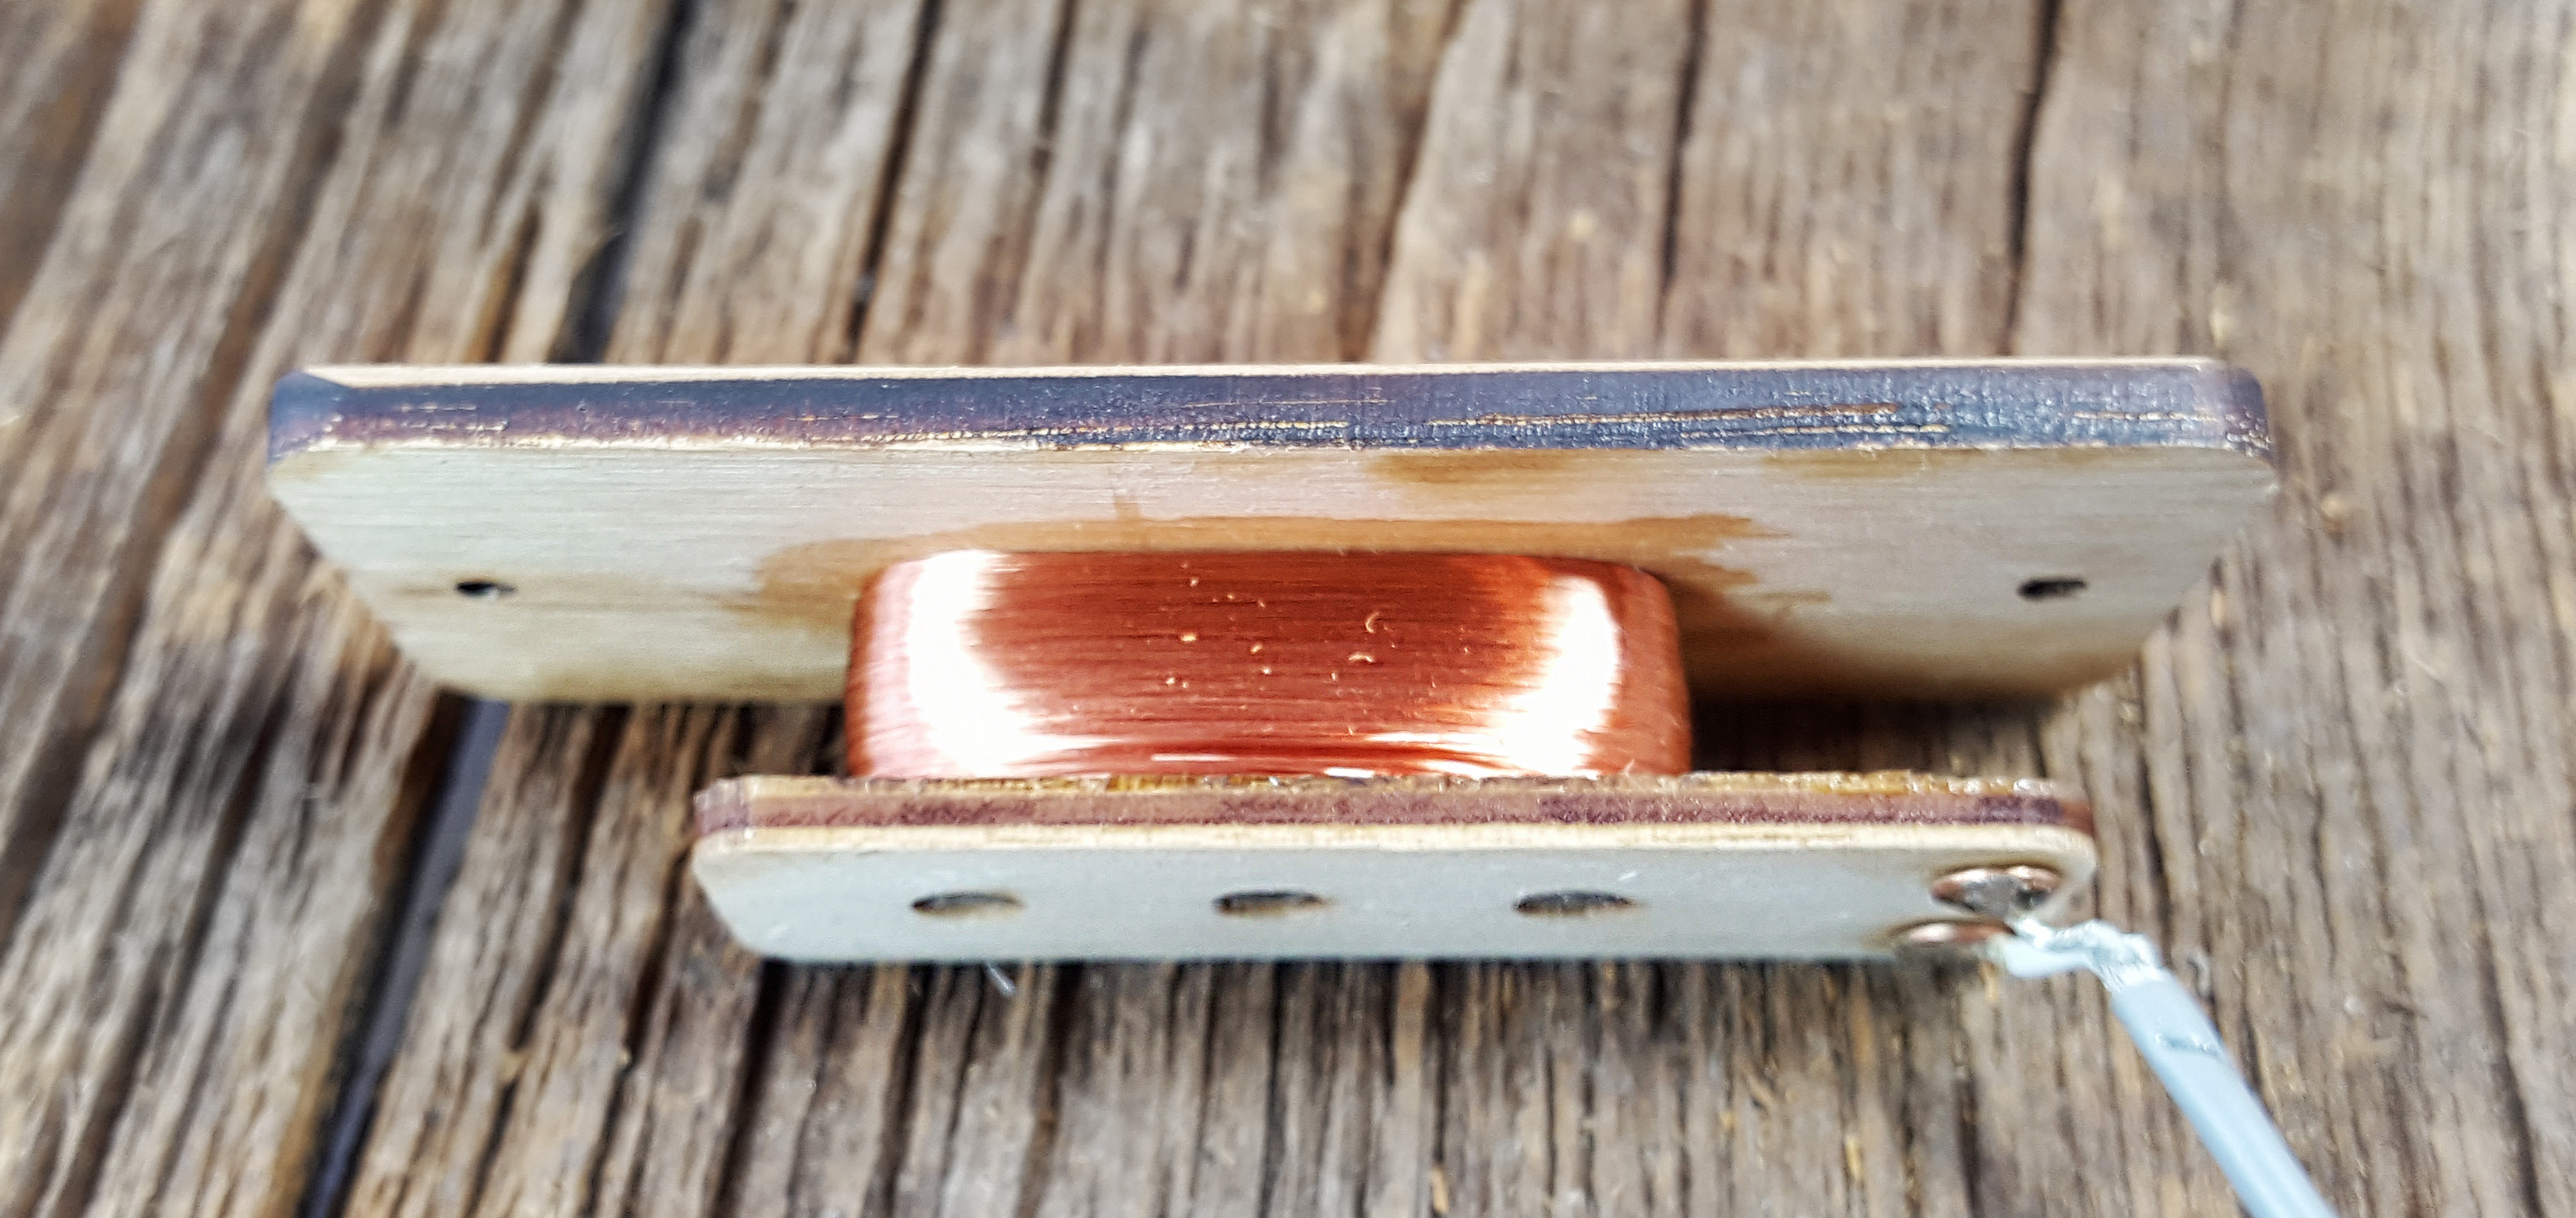 Copper wound around magnetic poles